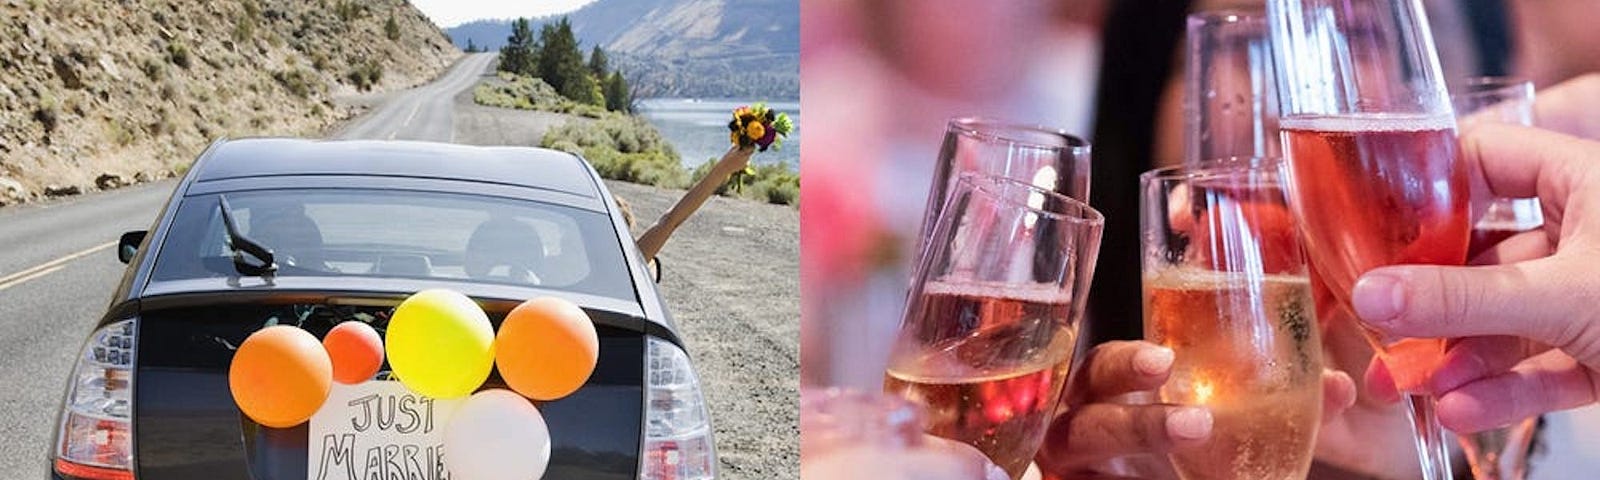 A car with just married balloons (left) and a wedding guest raising their glasses for a toast (right).